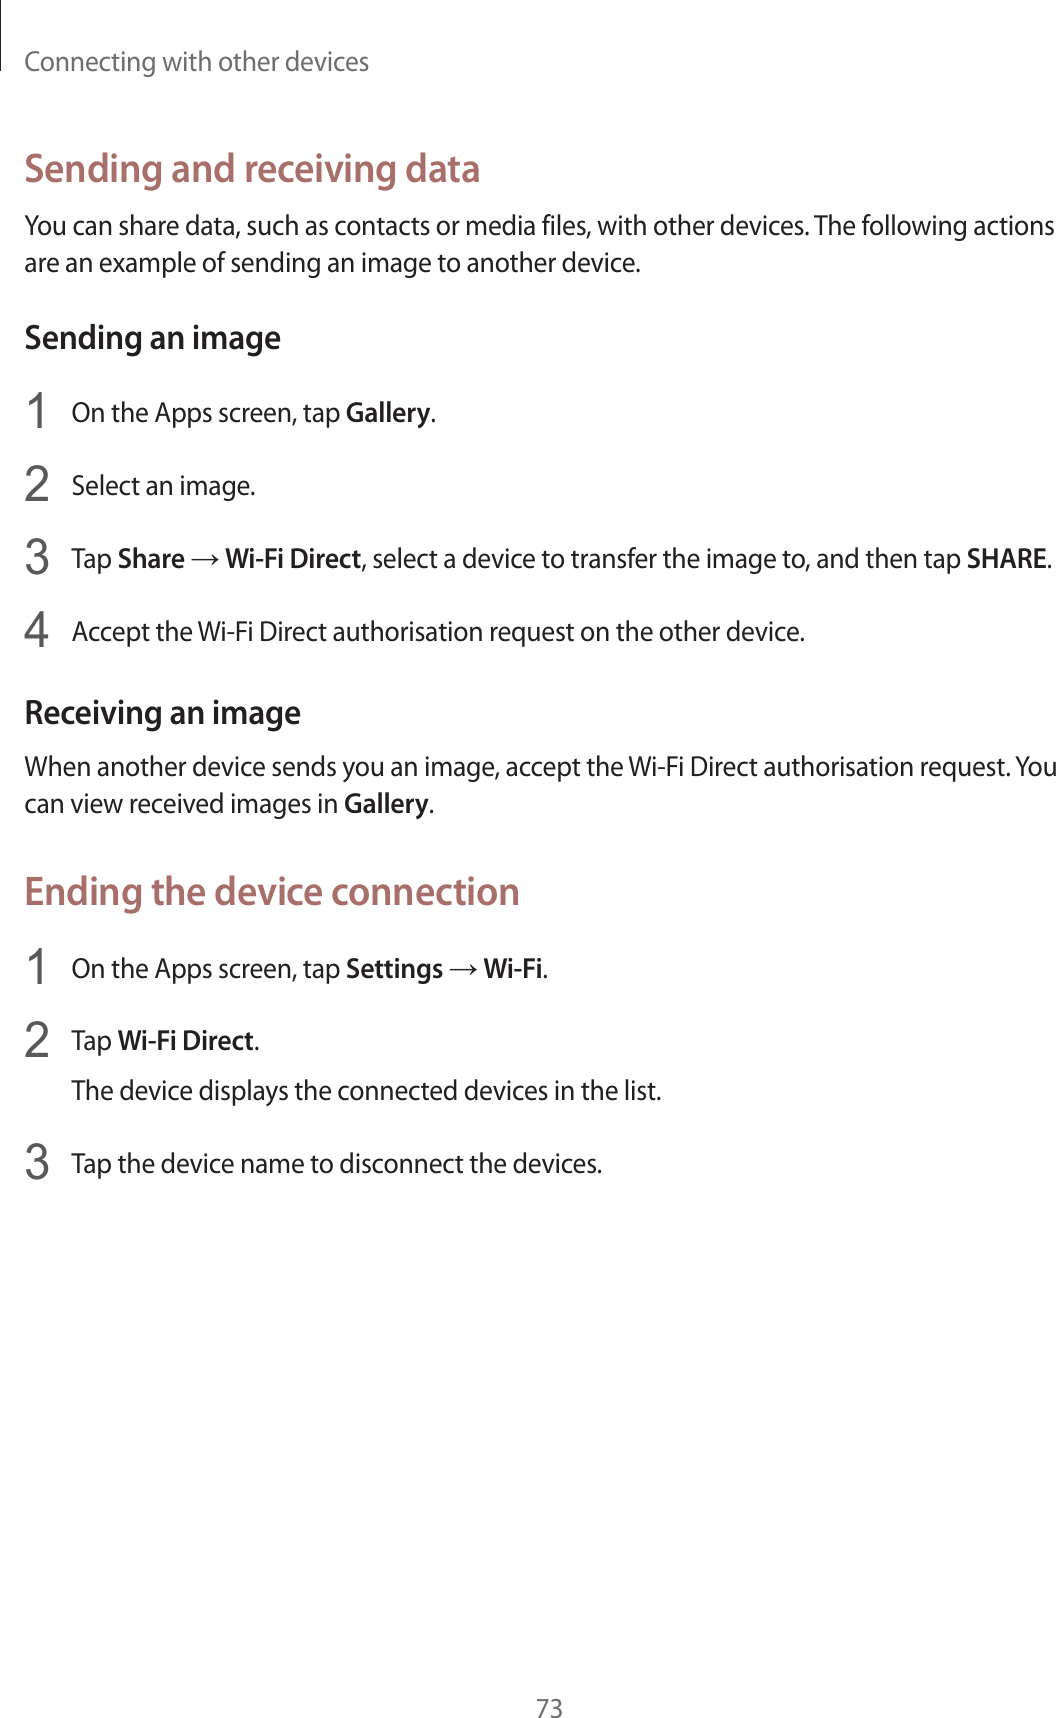 Connecting with other devices73Sending and receiving dataYou can share data, such as contacts or media files, with other devices. The following actions are an example of sending an image to another device.Sending an image1On the Apps screen, tap Gallery.2Select an image.3Tap Share ĺ Wi-Fi Direct, select a device to transfer the image to, and then tap SHARE.4Accept the Wi-Fi Direct authorisation request on the other device.Receiving an imageWhen another device sends you an image, accept the Wi-Fi Direct authorisation request. You can view received images in Gallery.Ending the device connection1On the Apps screen, tap Settings ĺ Wi-Fi.2Tap Wi-Fi Direct.The device displays the connected devices in the list.3Tap the device name to disconnect the devices.